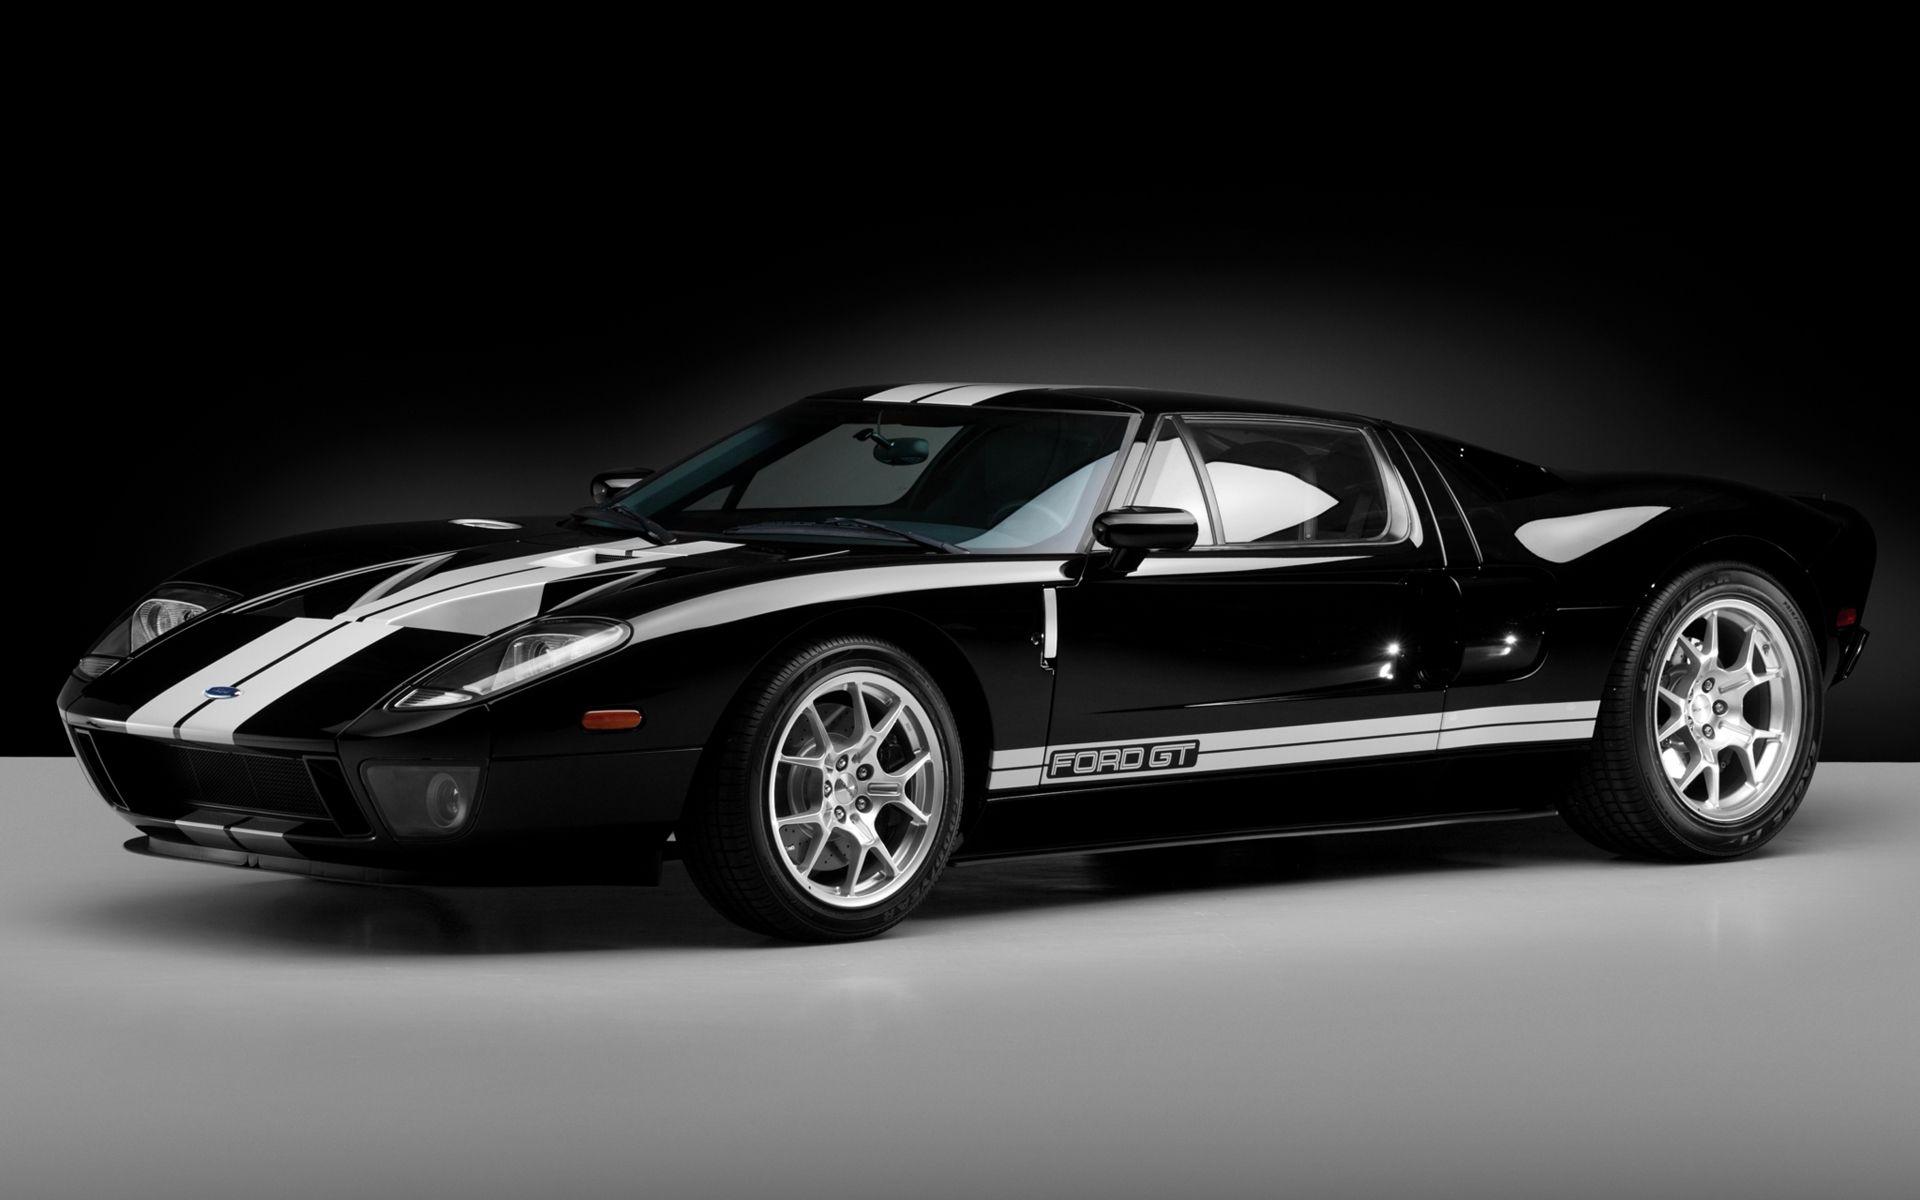 Black Ford Gt. The New stuff, Mustang, Cobra, Shelby & Variants